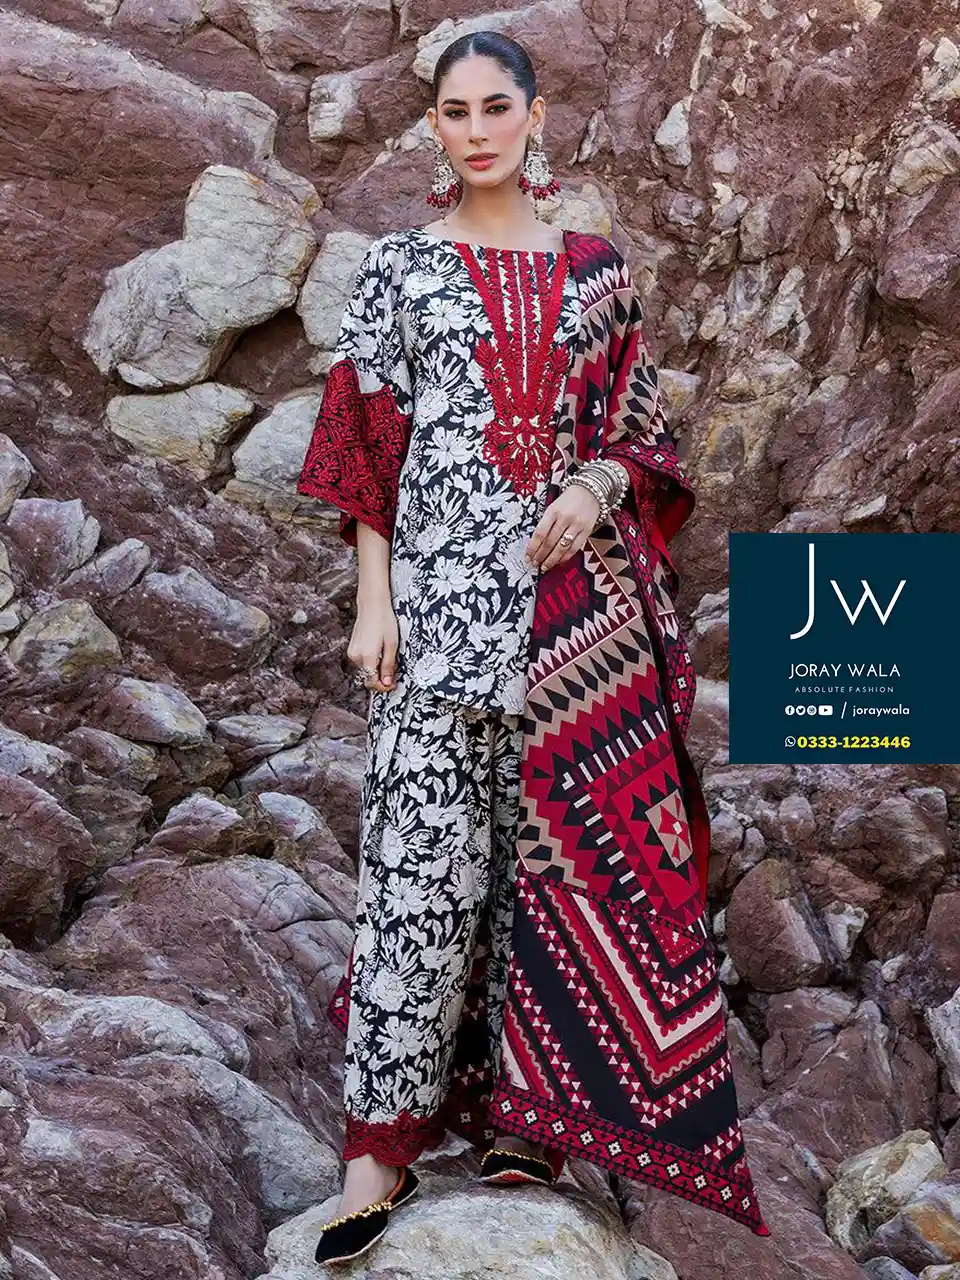 Bright sunny day and the model wearing zainab chottani stunning collection and standing at the sea, with rock. the suit have floral print.